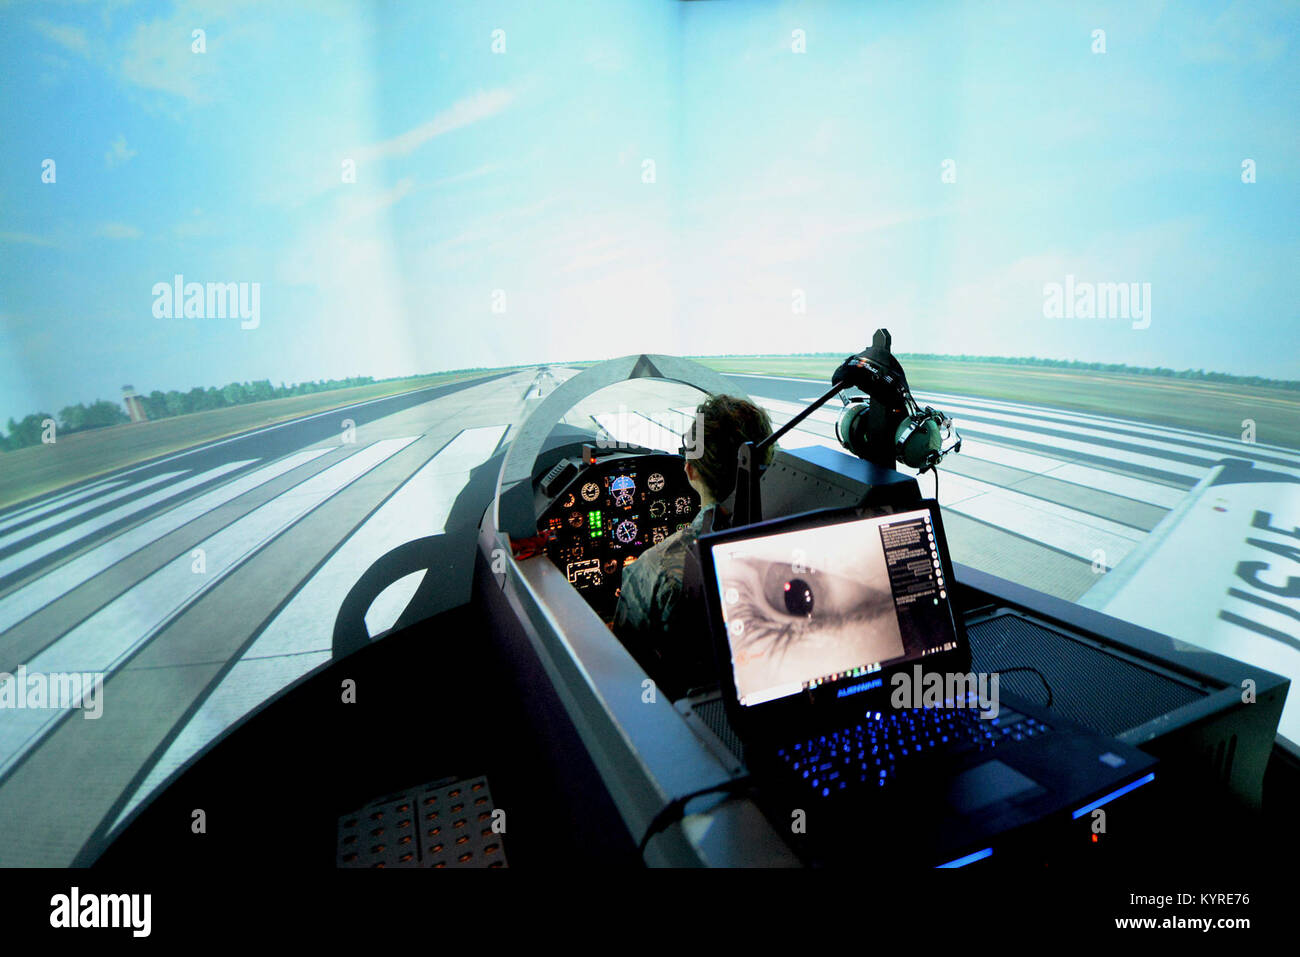 Second Lt. Madeline Schmitz, 14th Student Squadron student pilot, prepares to take flight in the T-6 Texan II flight simulator Jan 10, 2018, on Columbus Air Force Base, Mississippi. The Adaptive Flight Training Study here pushed subjects to learn through the virtual reality technology but used the T-6 flight simulator as a baseline to compare the other VR sorties to. This allowed researchers to see if the subject’s flights got better or worse after the VR flight training. (U.S. Air Force Stock Photo